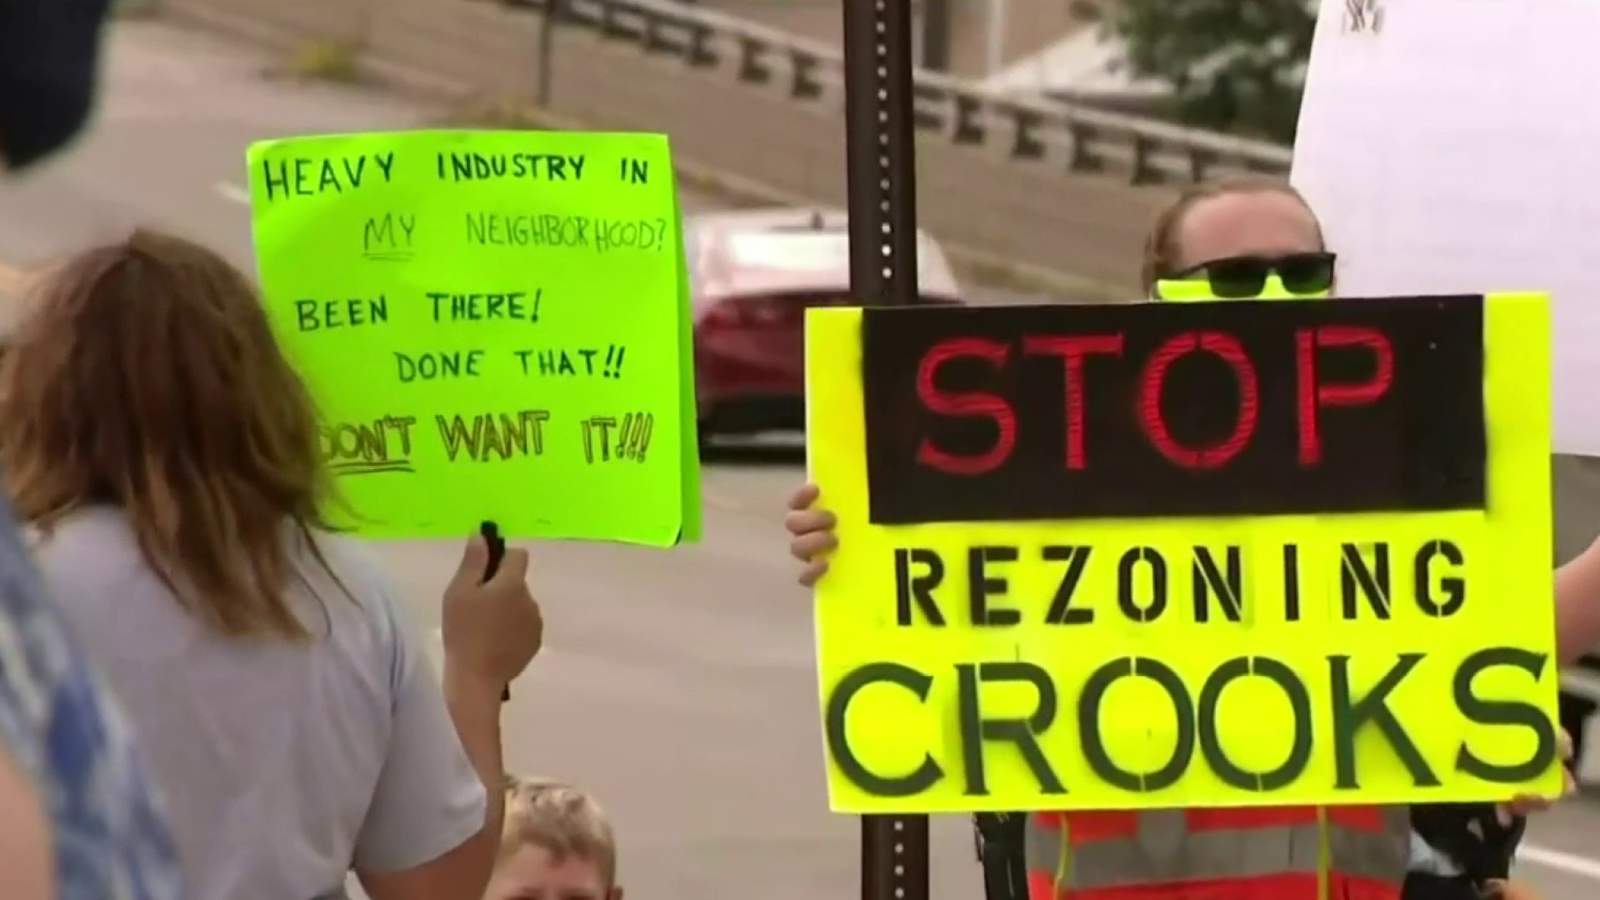 Protesters gather at Trenton City Hall to reject McLouth Steel zoning changes